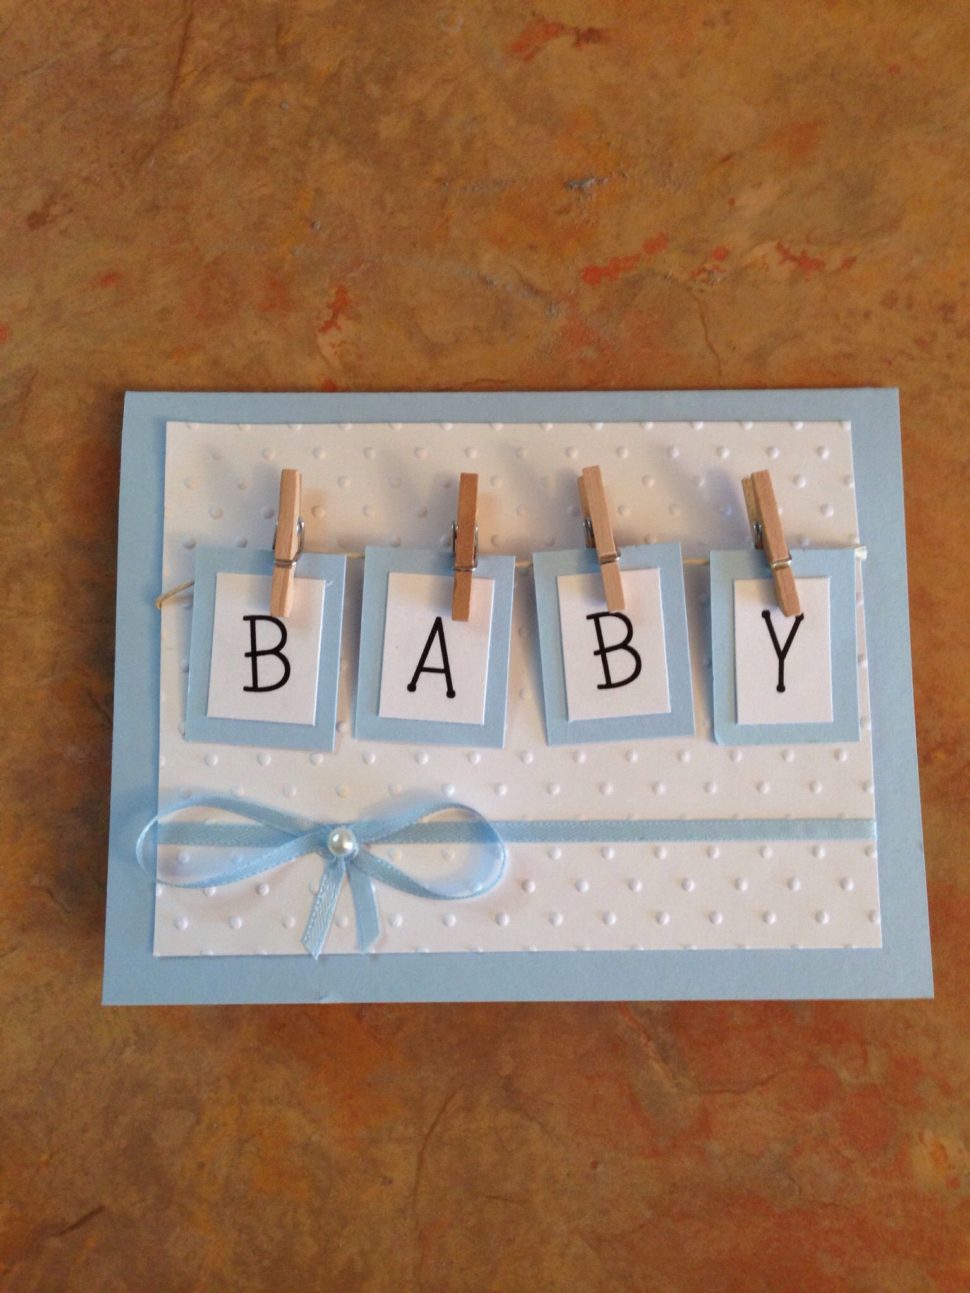 Medium Size of Baby Shower:graceful Baby Shower Cards Image Designs Baby Shower Cards Cosas Para Baby Shower Baby Shower Diaper Game Articulos Para Baby Shower Baby Shower Supplies Arreglos De Baby Shower Baby Shower Games Handmade Baby Shower Card Tiny Clothespins Attach Bowith Baby Spelled Out Blue And White Could Be Changed To Yellow Pink Of Any Other Color